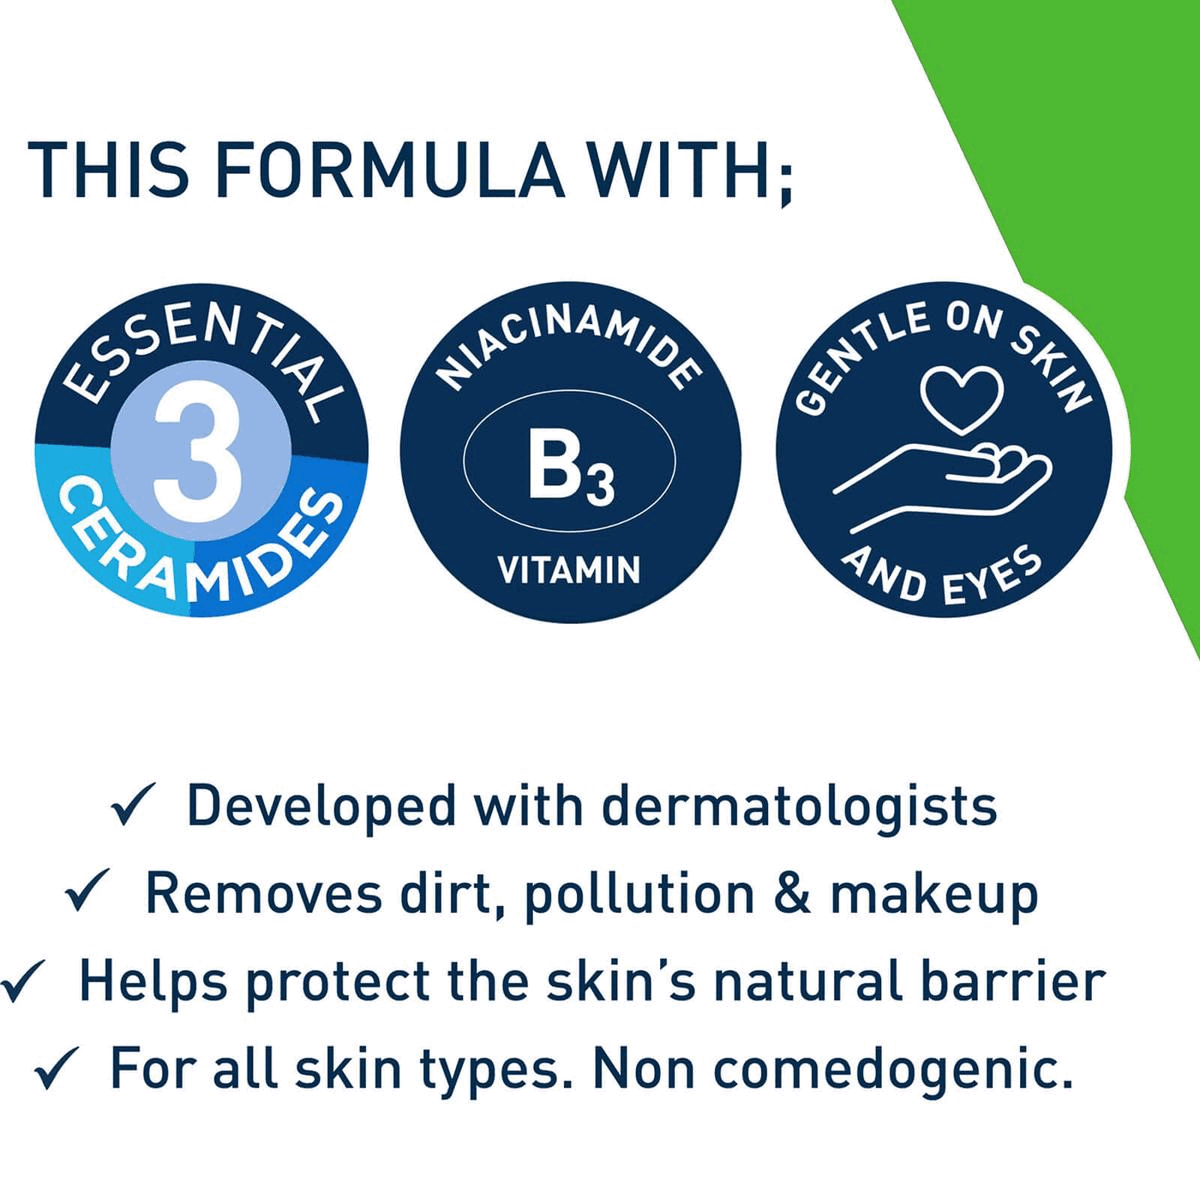 Image 1- this formula with 3 essential ceramides, niacinamide vitamin B3, gentle on skin and eyes, developed with dermatologists, removes dirt, pollution and makeup, helps protect the skin's natural barrier, for all skin types, non-comedogenic